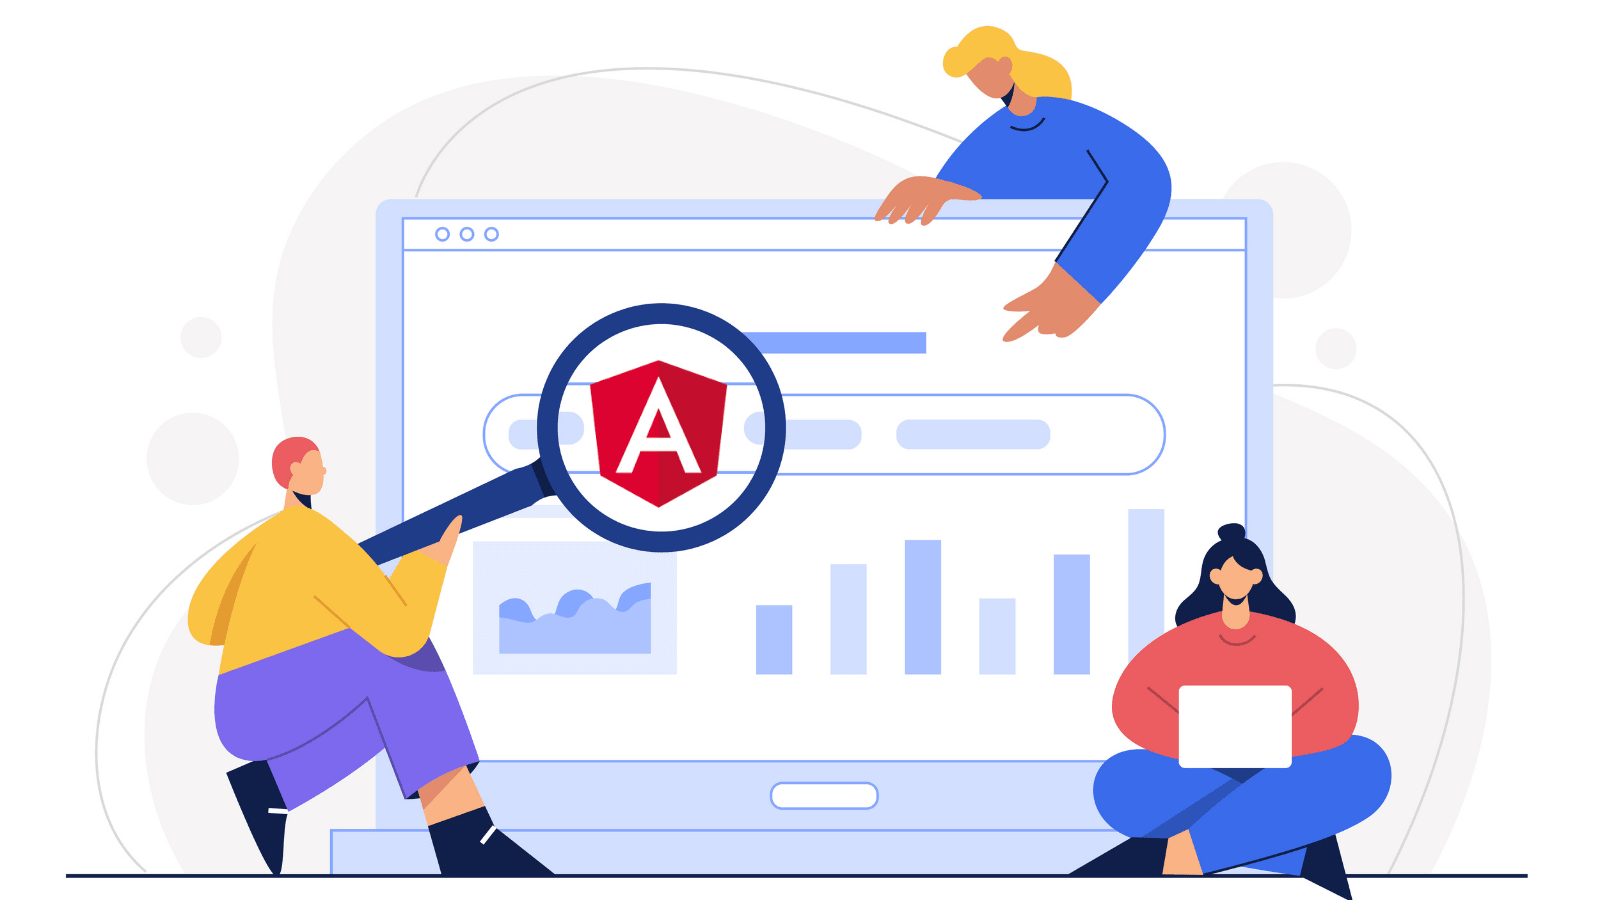 Why was Angular introduced as a client-side framework?